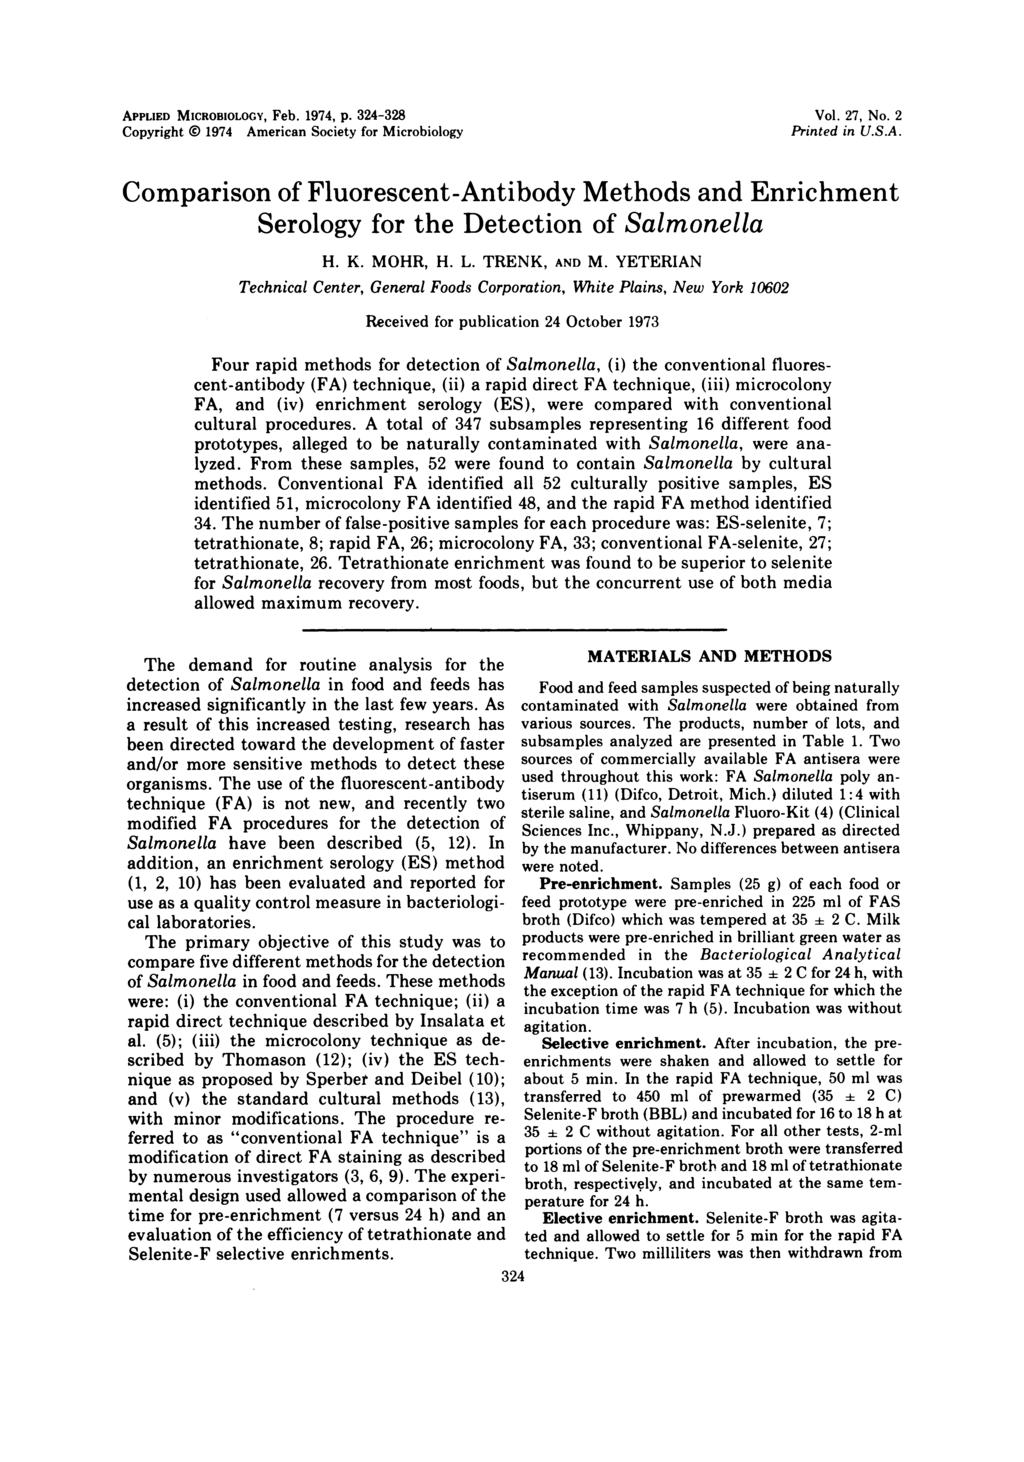 APPLIED MICROBIOLOGY, Feb. 1974, p. 324-328 Copyright i 1974 American Society for Microbiology Vol. 27, No. 2 Printed in U.S.A. Comparison of Fluorescent-Antibody Methods and Enrichment Serology for the Detection of Salmonella H.